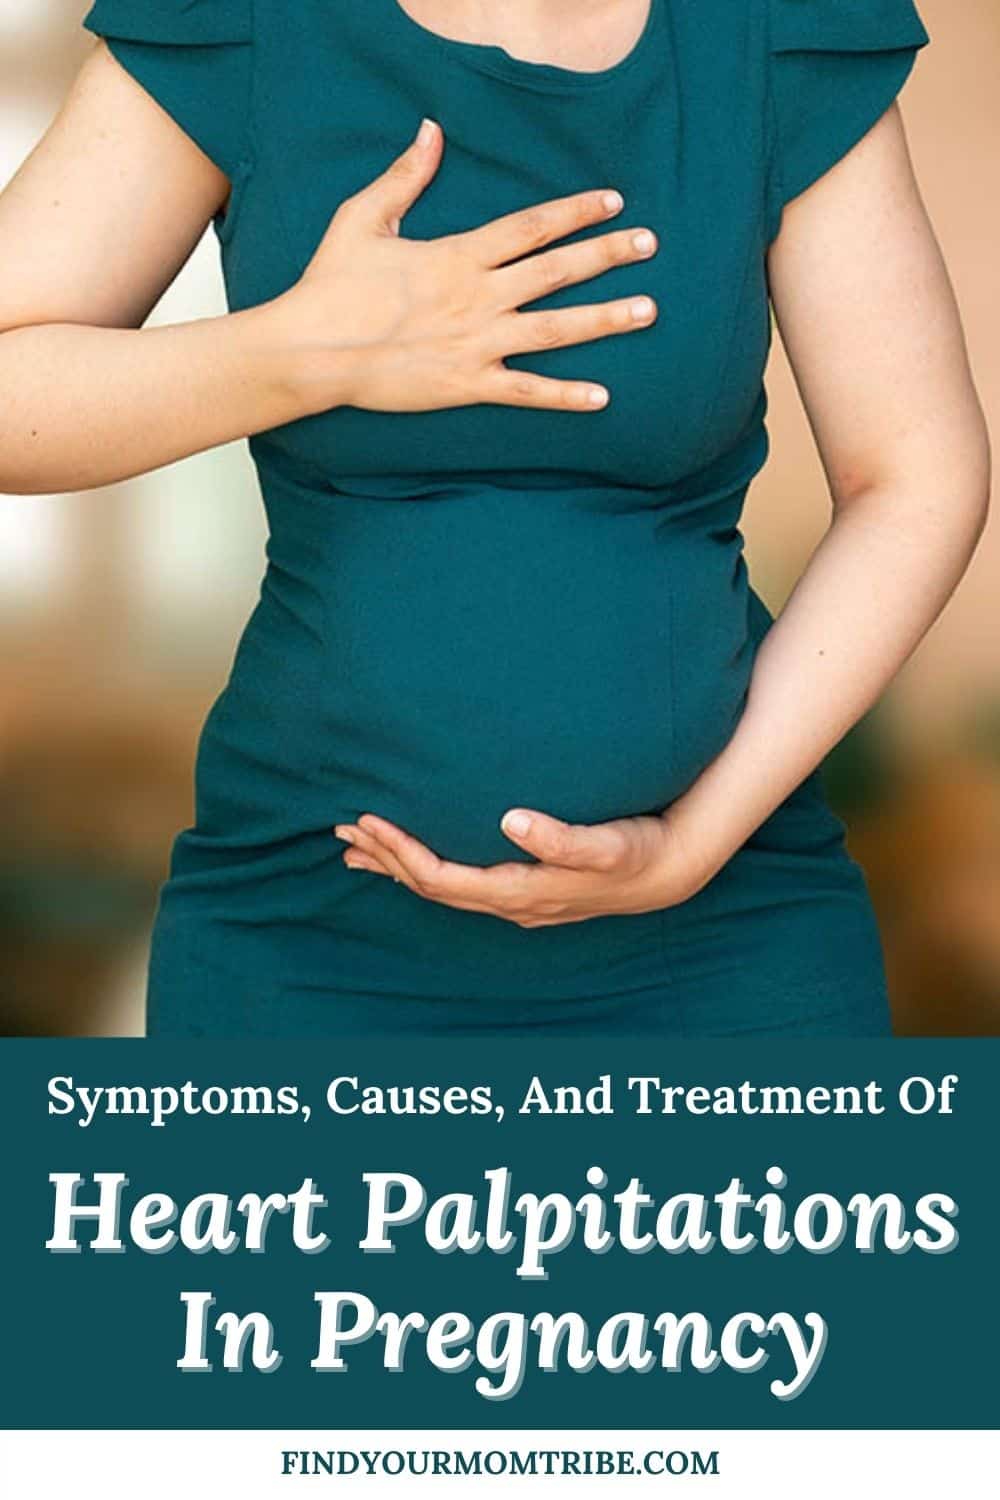 Heart Palpitations In Pregnancy